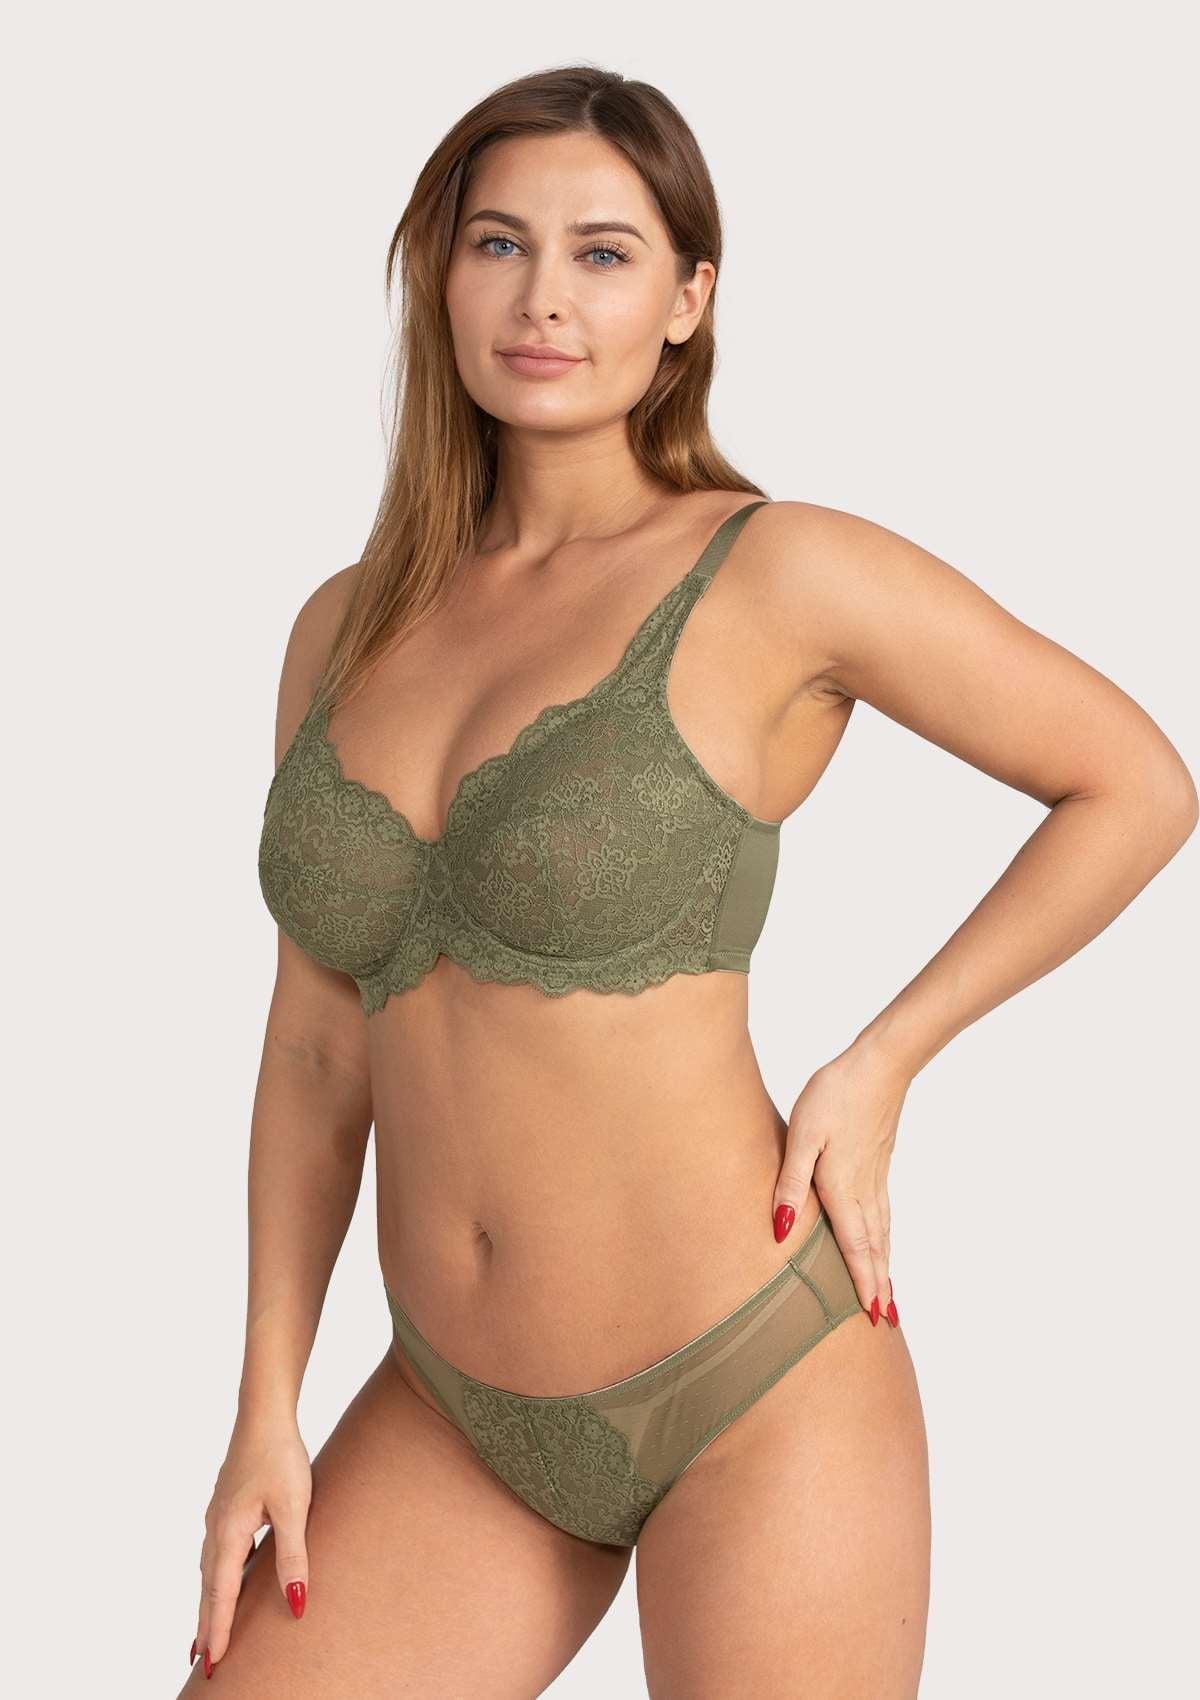 HSIA All-Over Floral Lace Unlined Bra: Minimizer Bra For Heavy Breasts - Dark Green / 34 / D